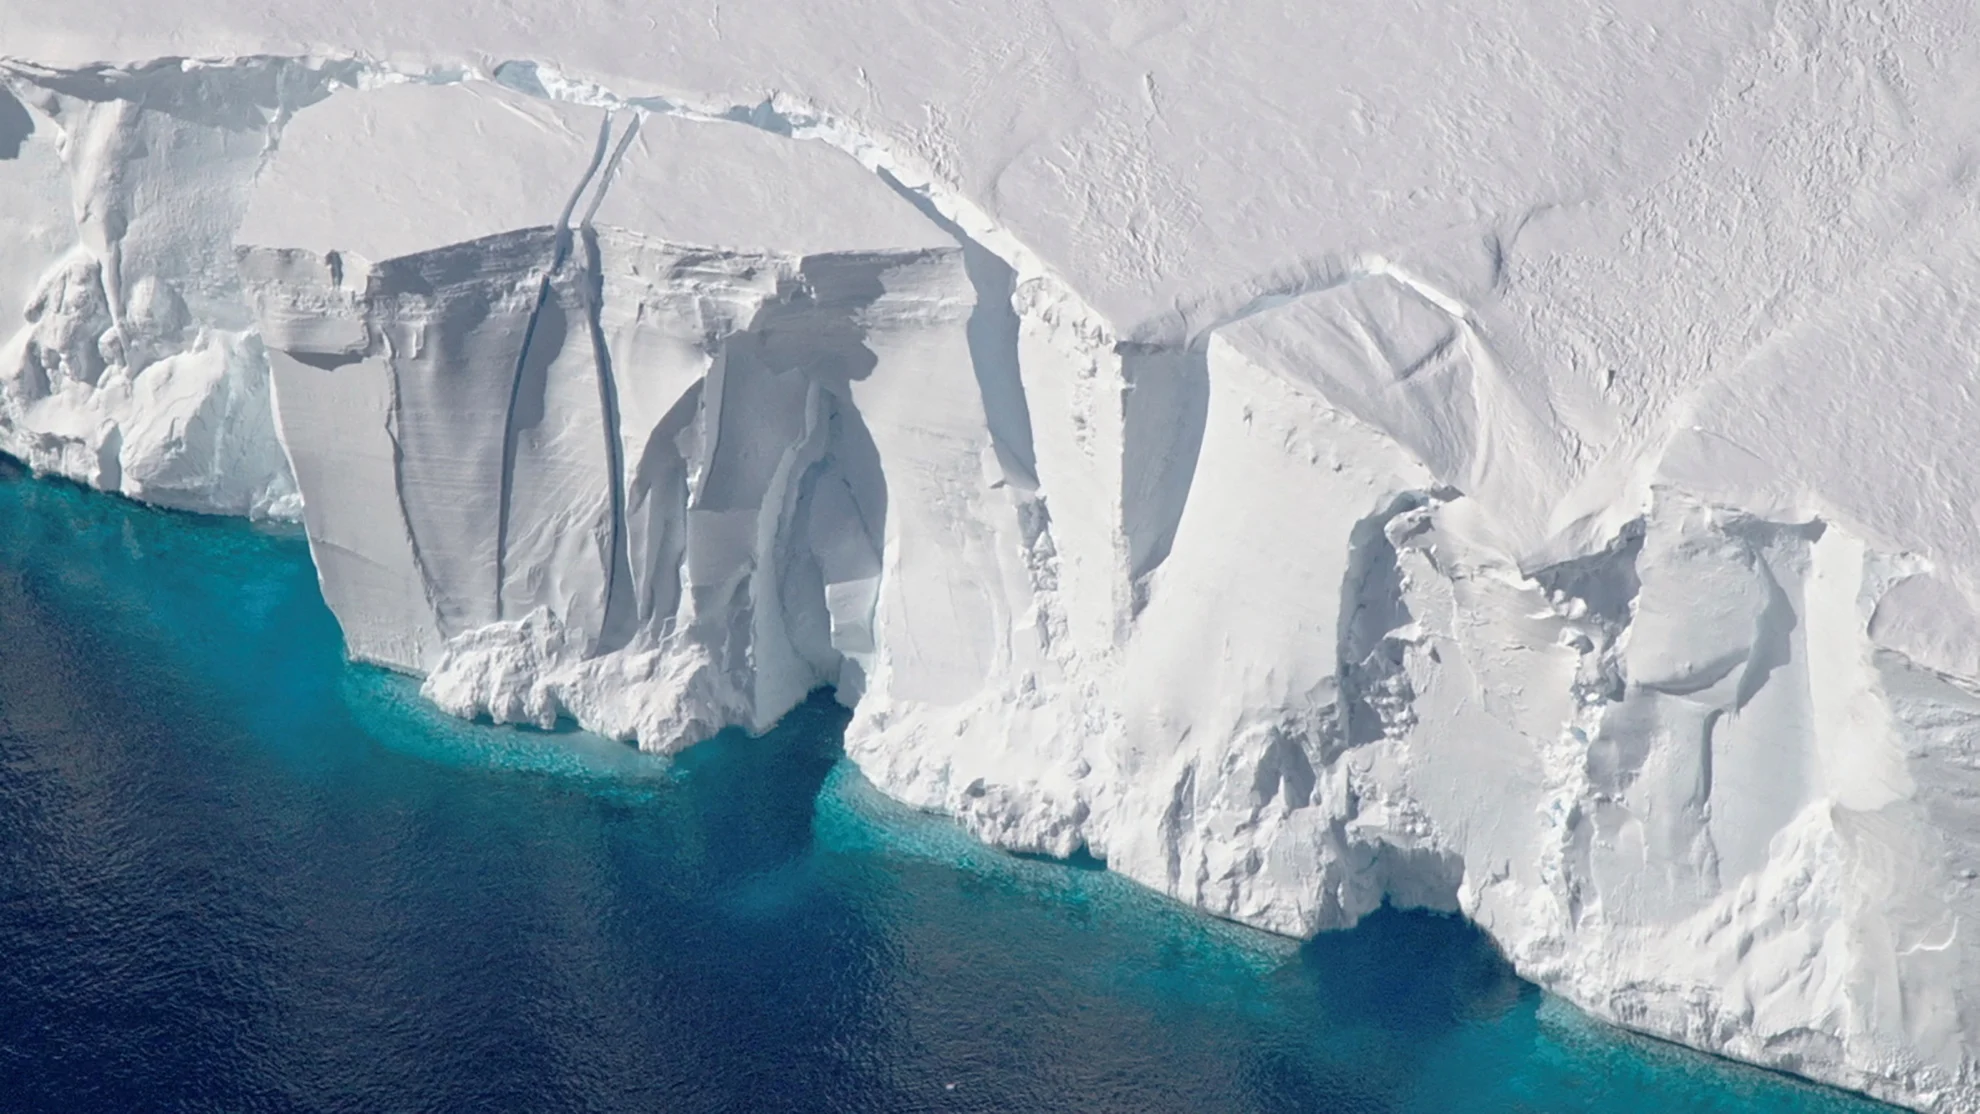 Rising Antarctic ice melt will dramatically slow global ocean flows - study